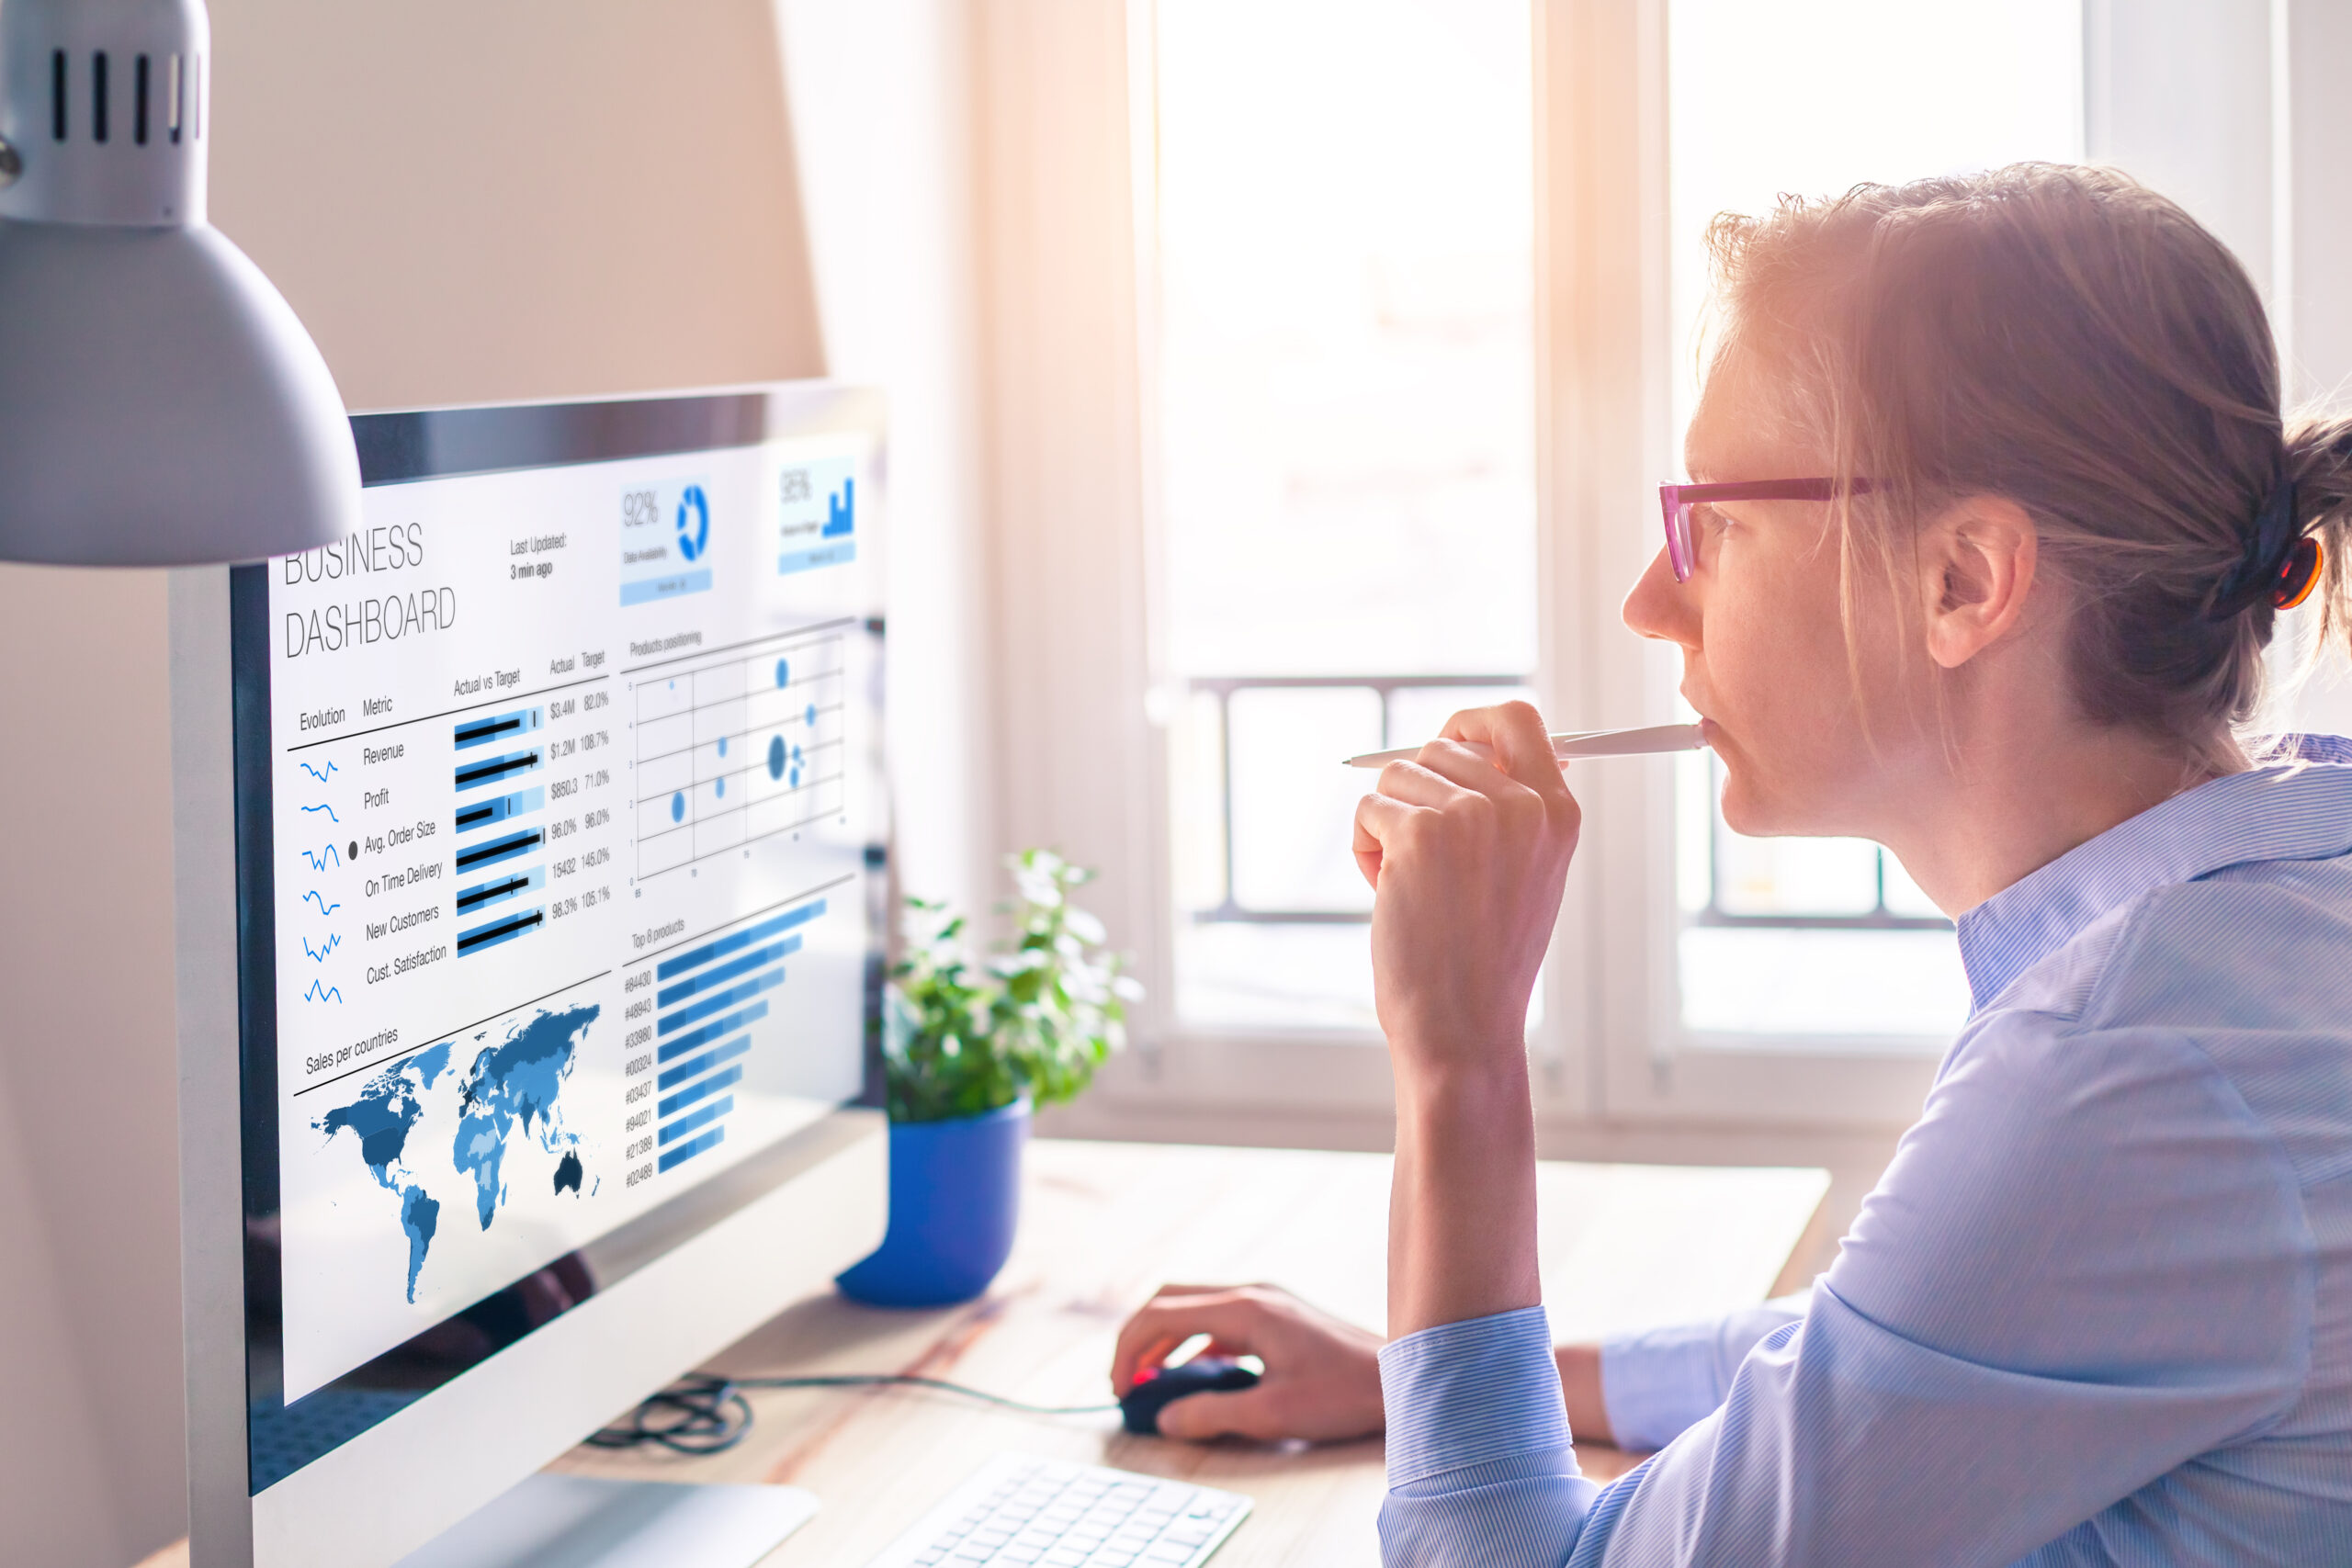 Woman looking at business dashboard